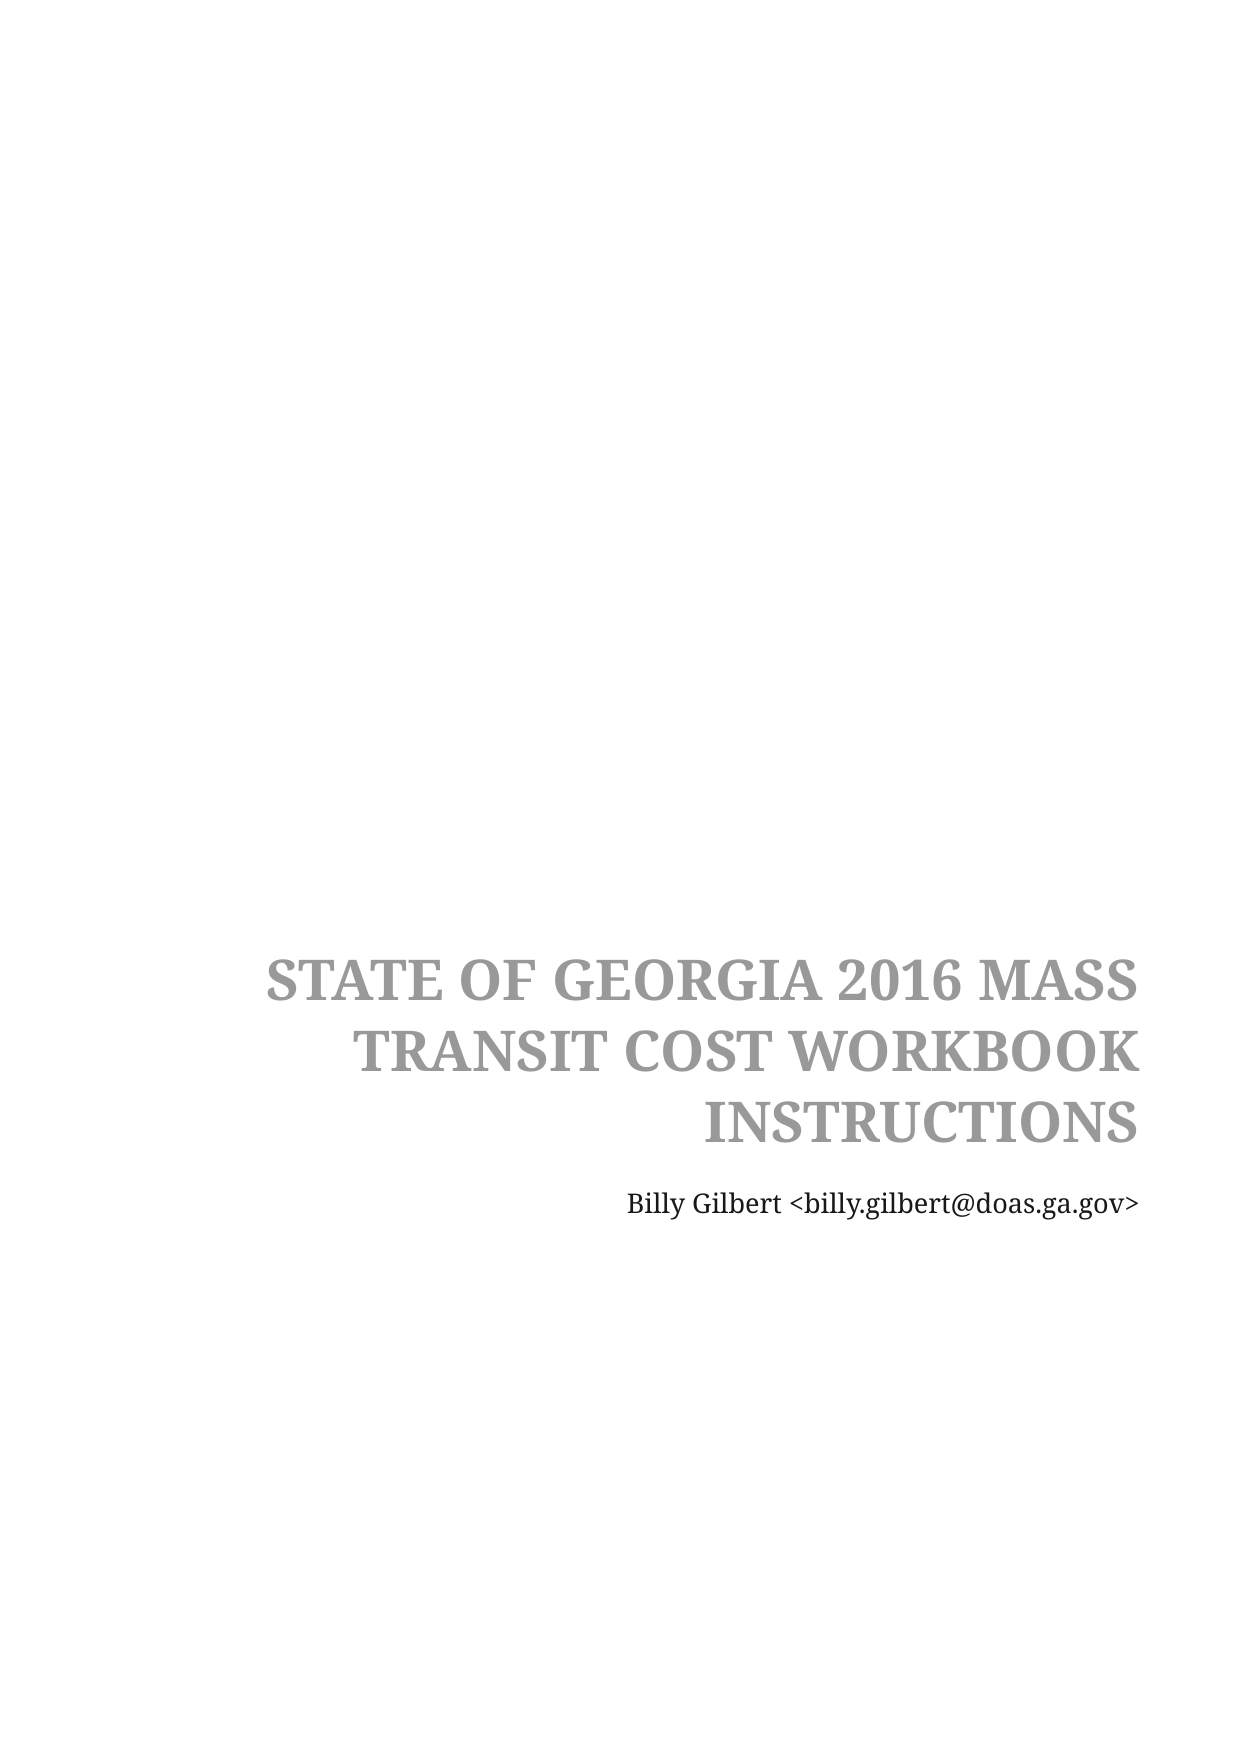 Page 1 of 4 - STATE OF GEORGIA 2016 MASS TRANSIT COST WORKBOOK INSTRUCTIONS